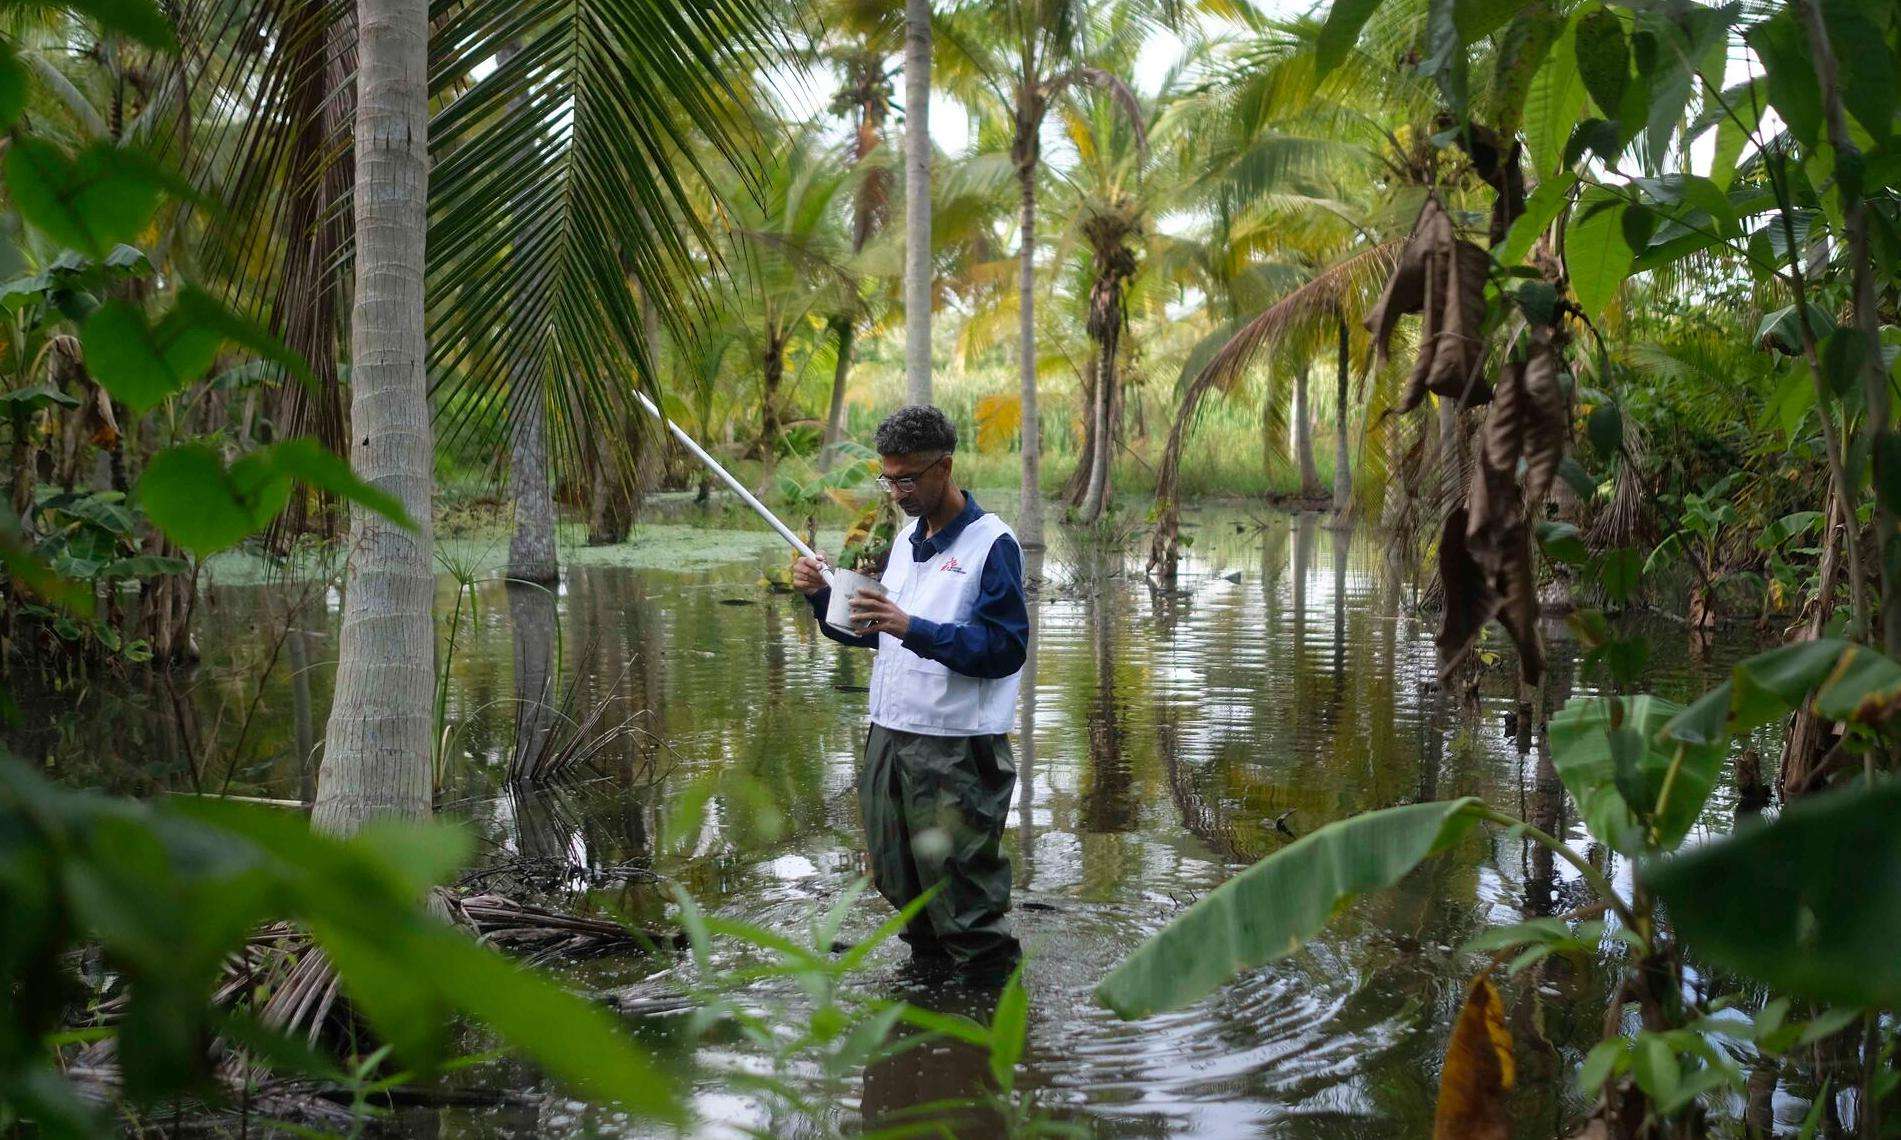 An MSF staff member wearing a white vest stands in the middle of floodwater surrounded by palm trees in Venezuela.